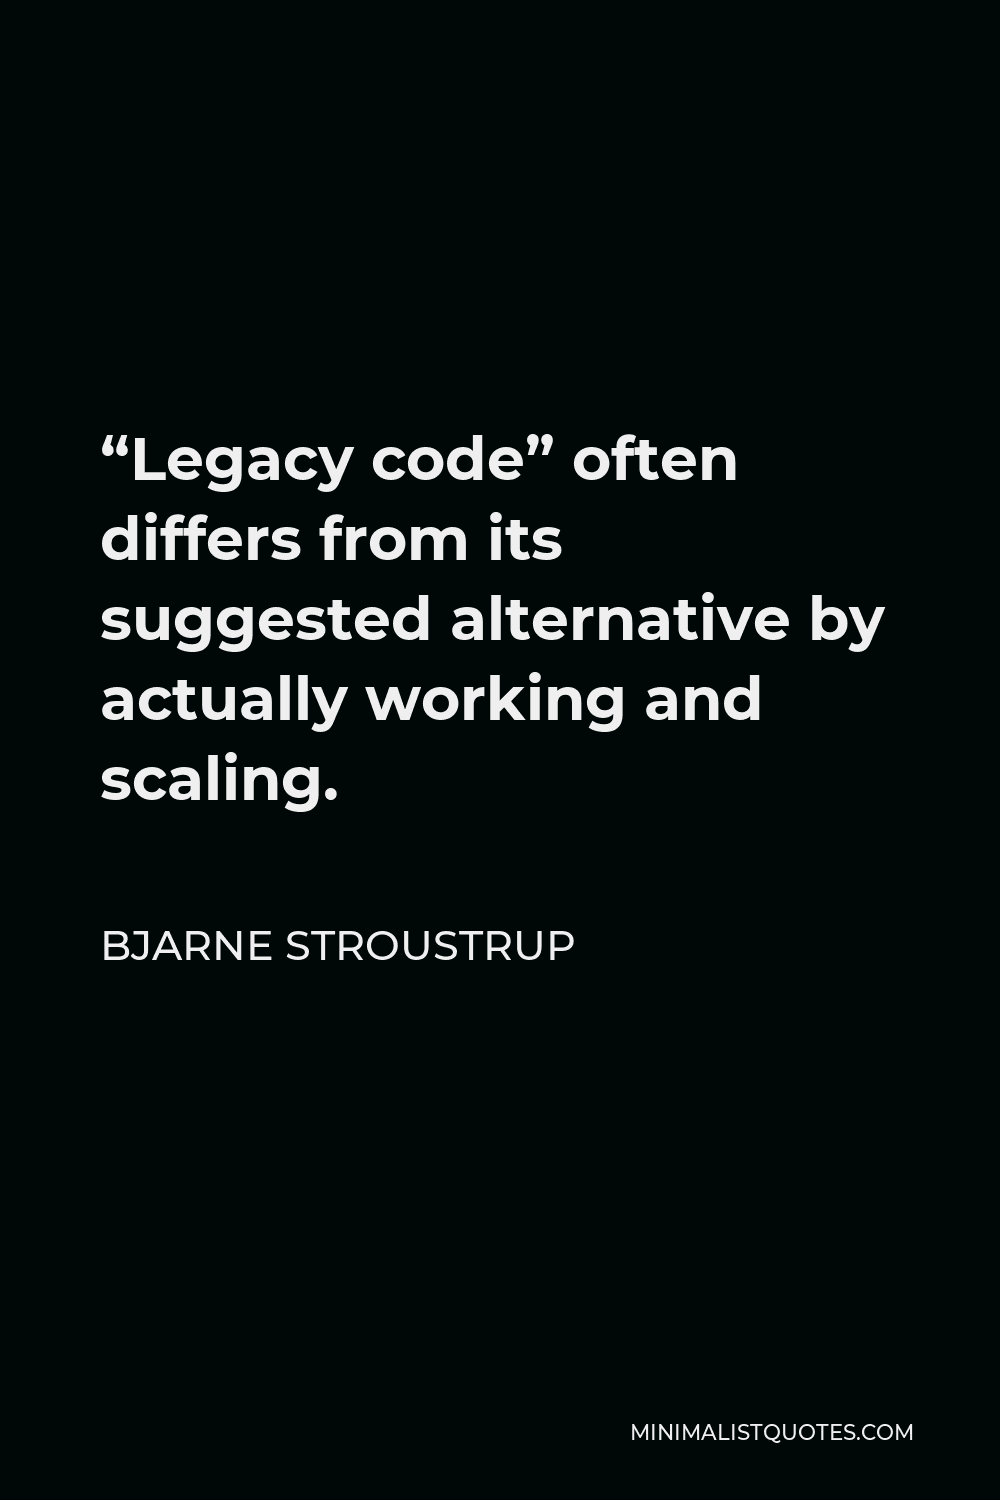 Bjarne Stroustrup Quote - “Legacy code” often differs from its suggested alternative by actually working and scaling.